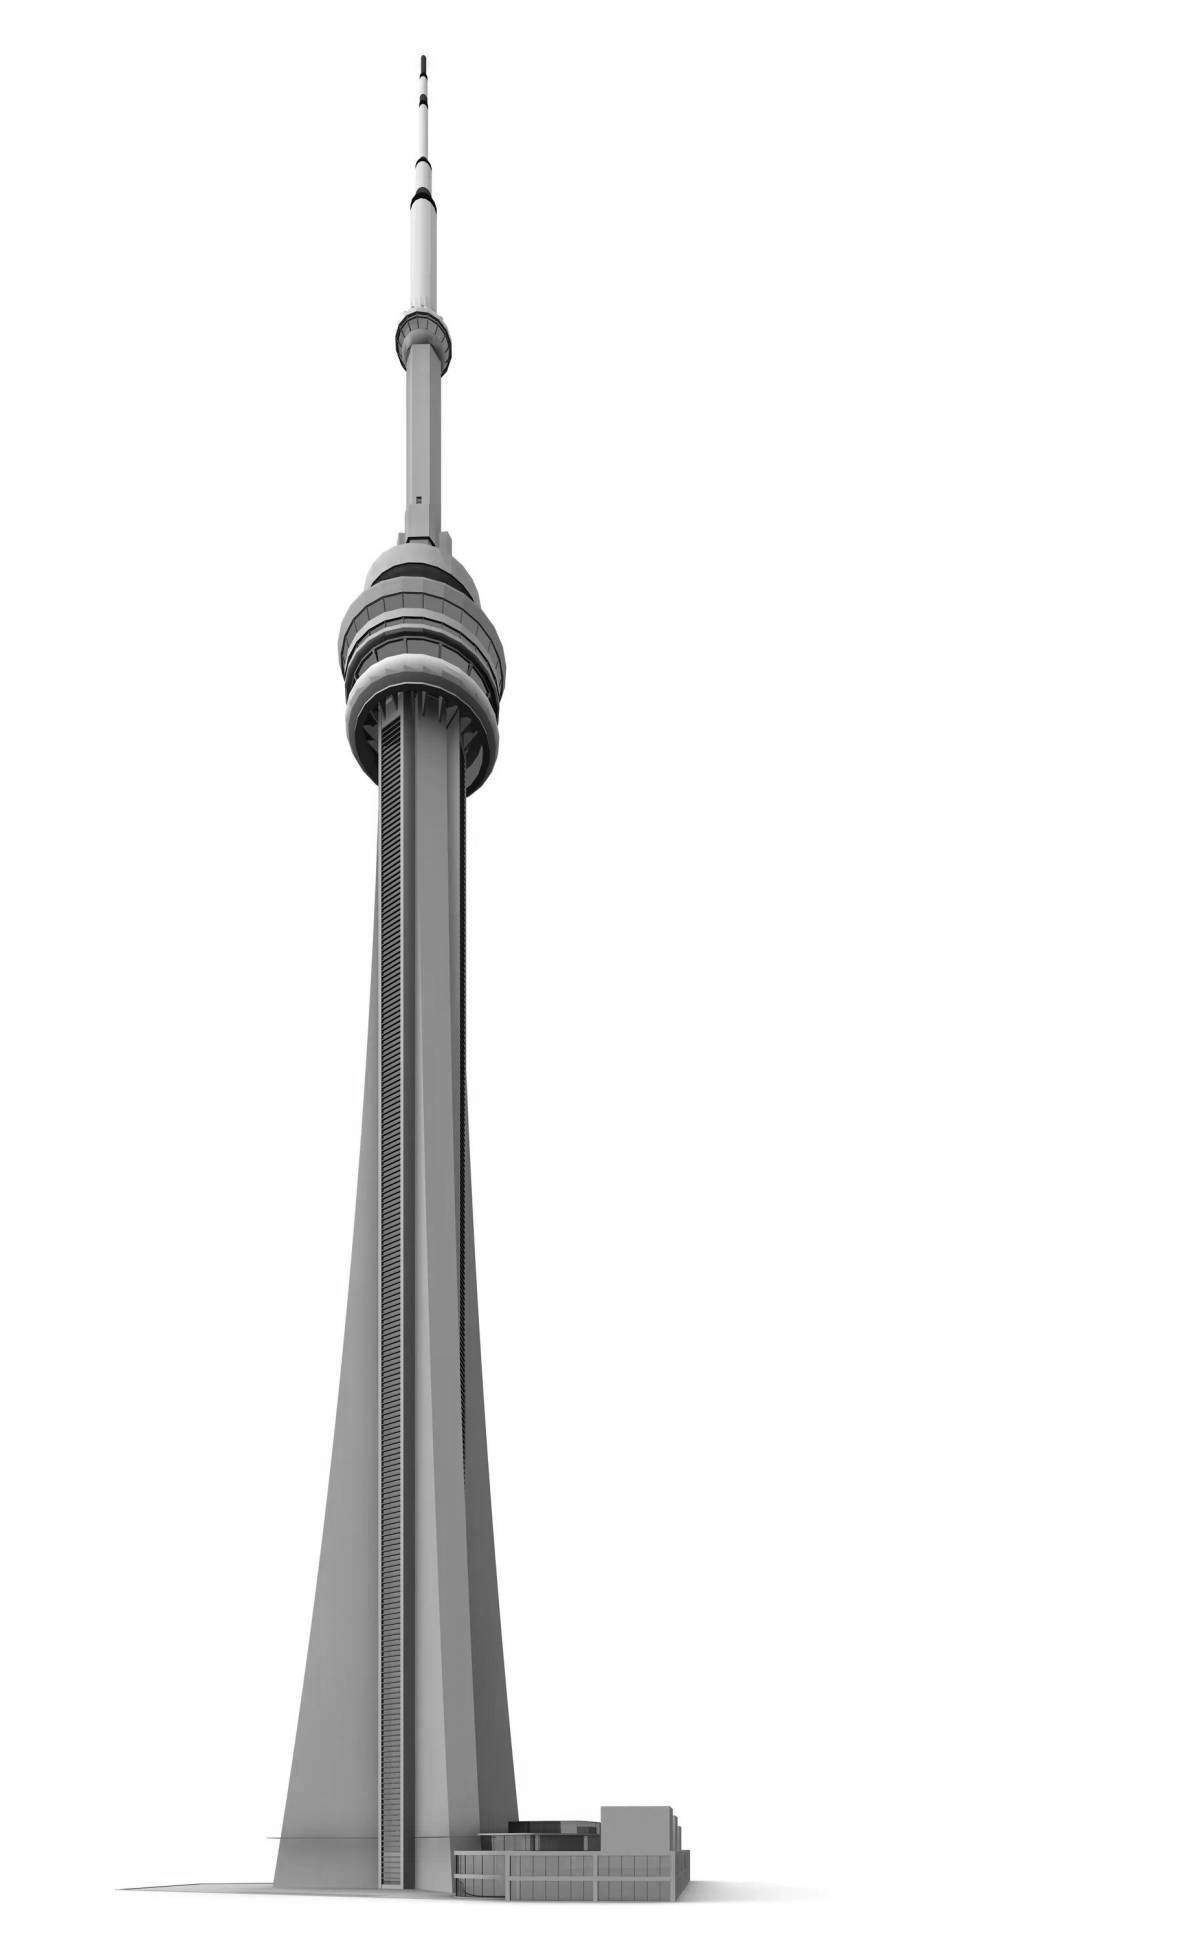 Famous CN tower coloring book